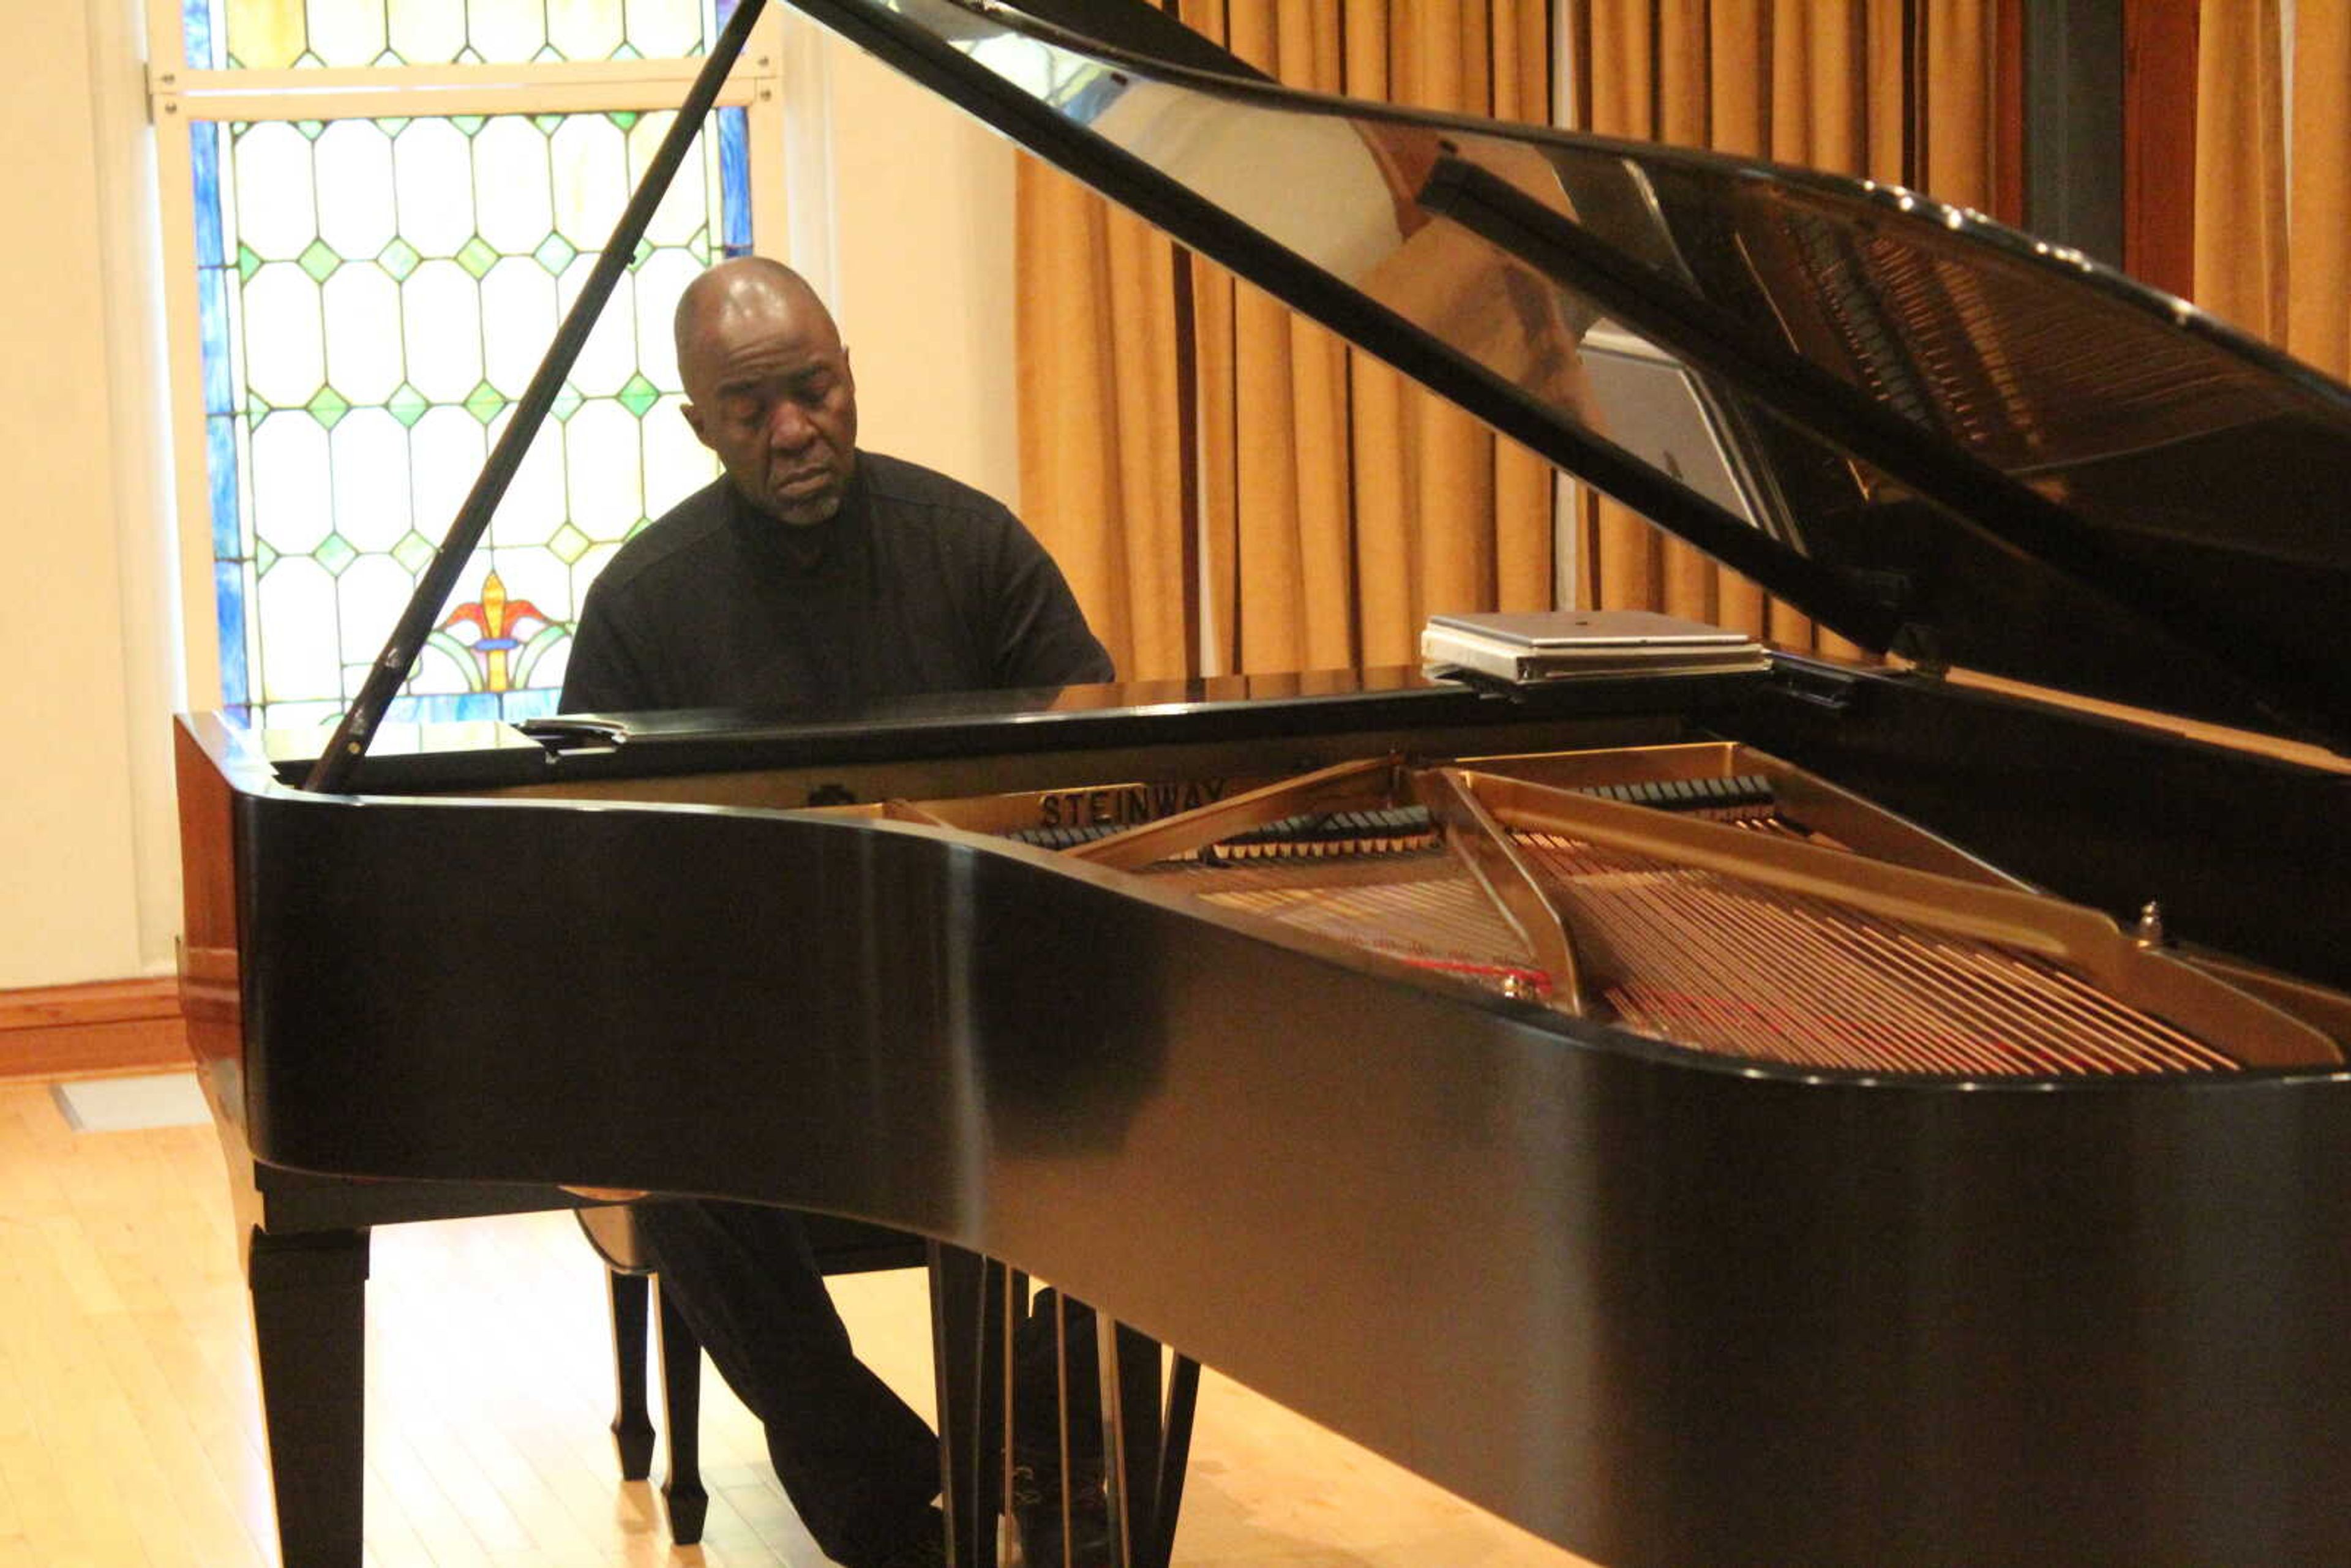 Renowned pianist bring sounds of African culture to Southeast